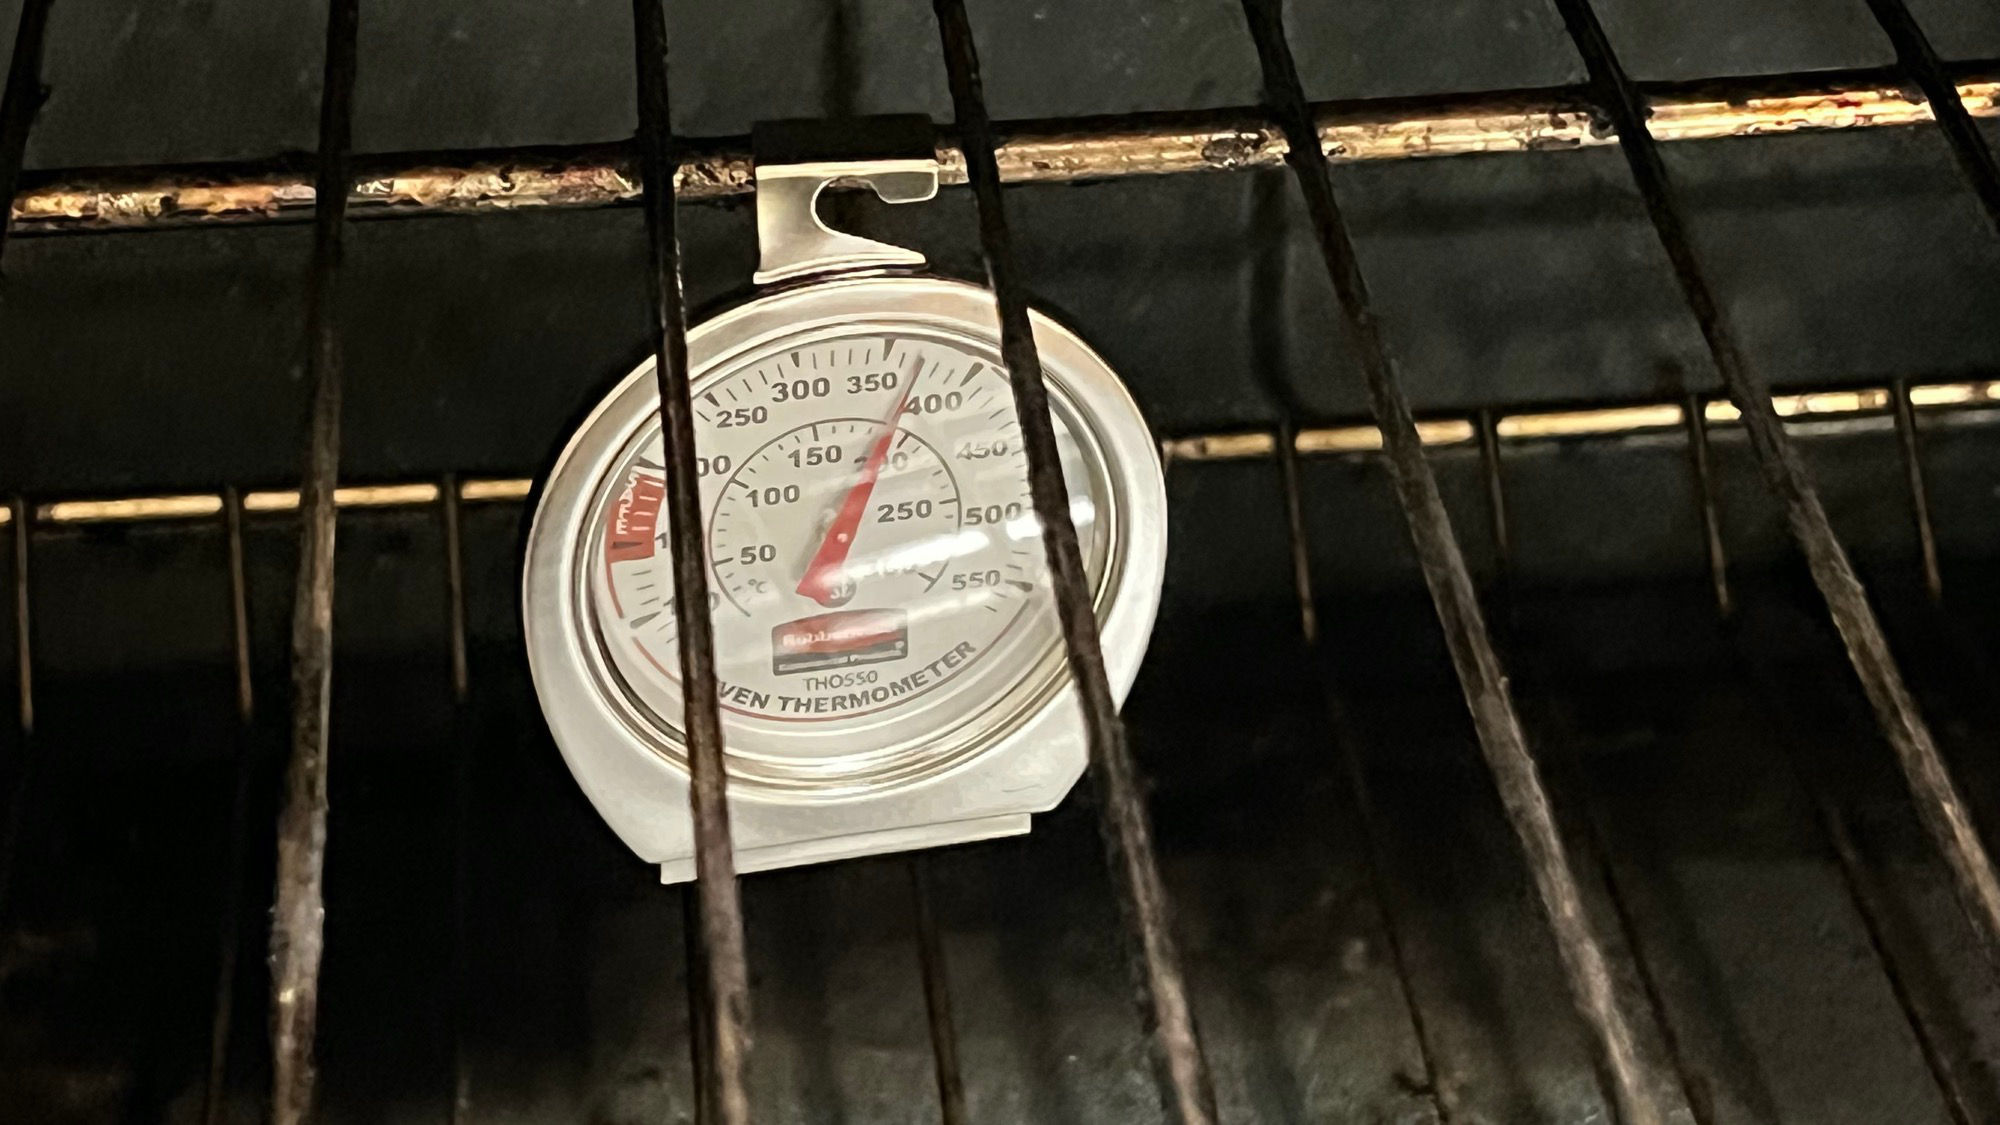 Oven Thermometer Hangs on the Rack